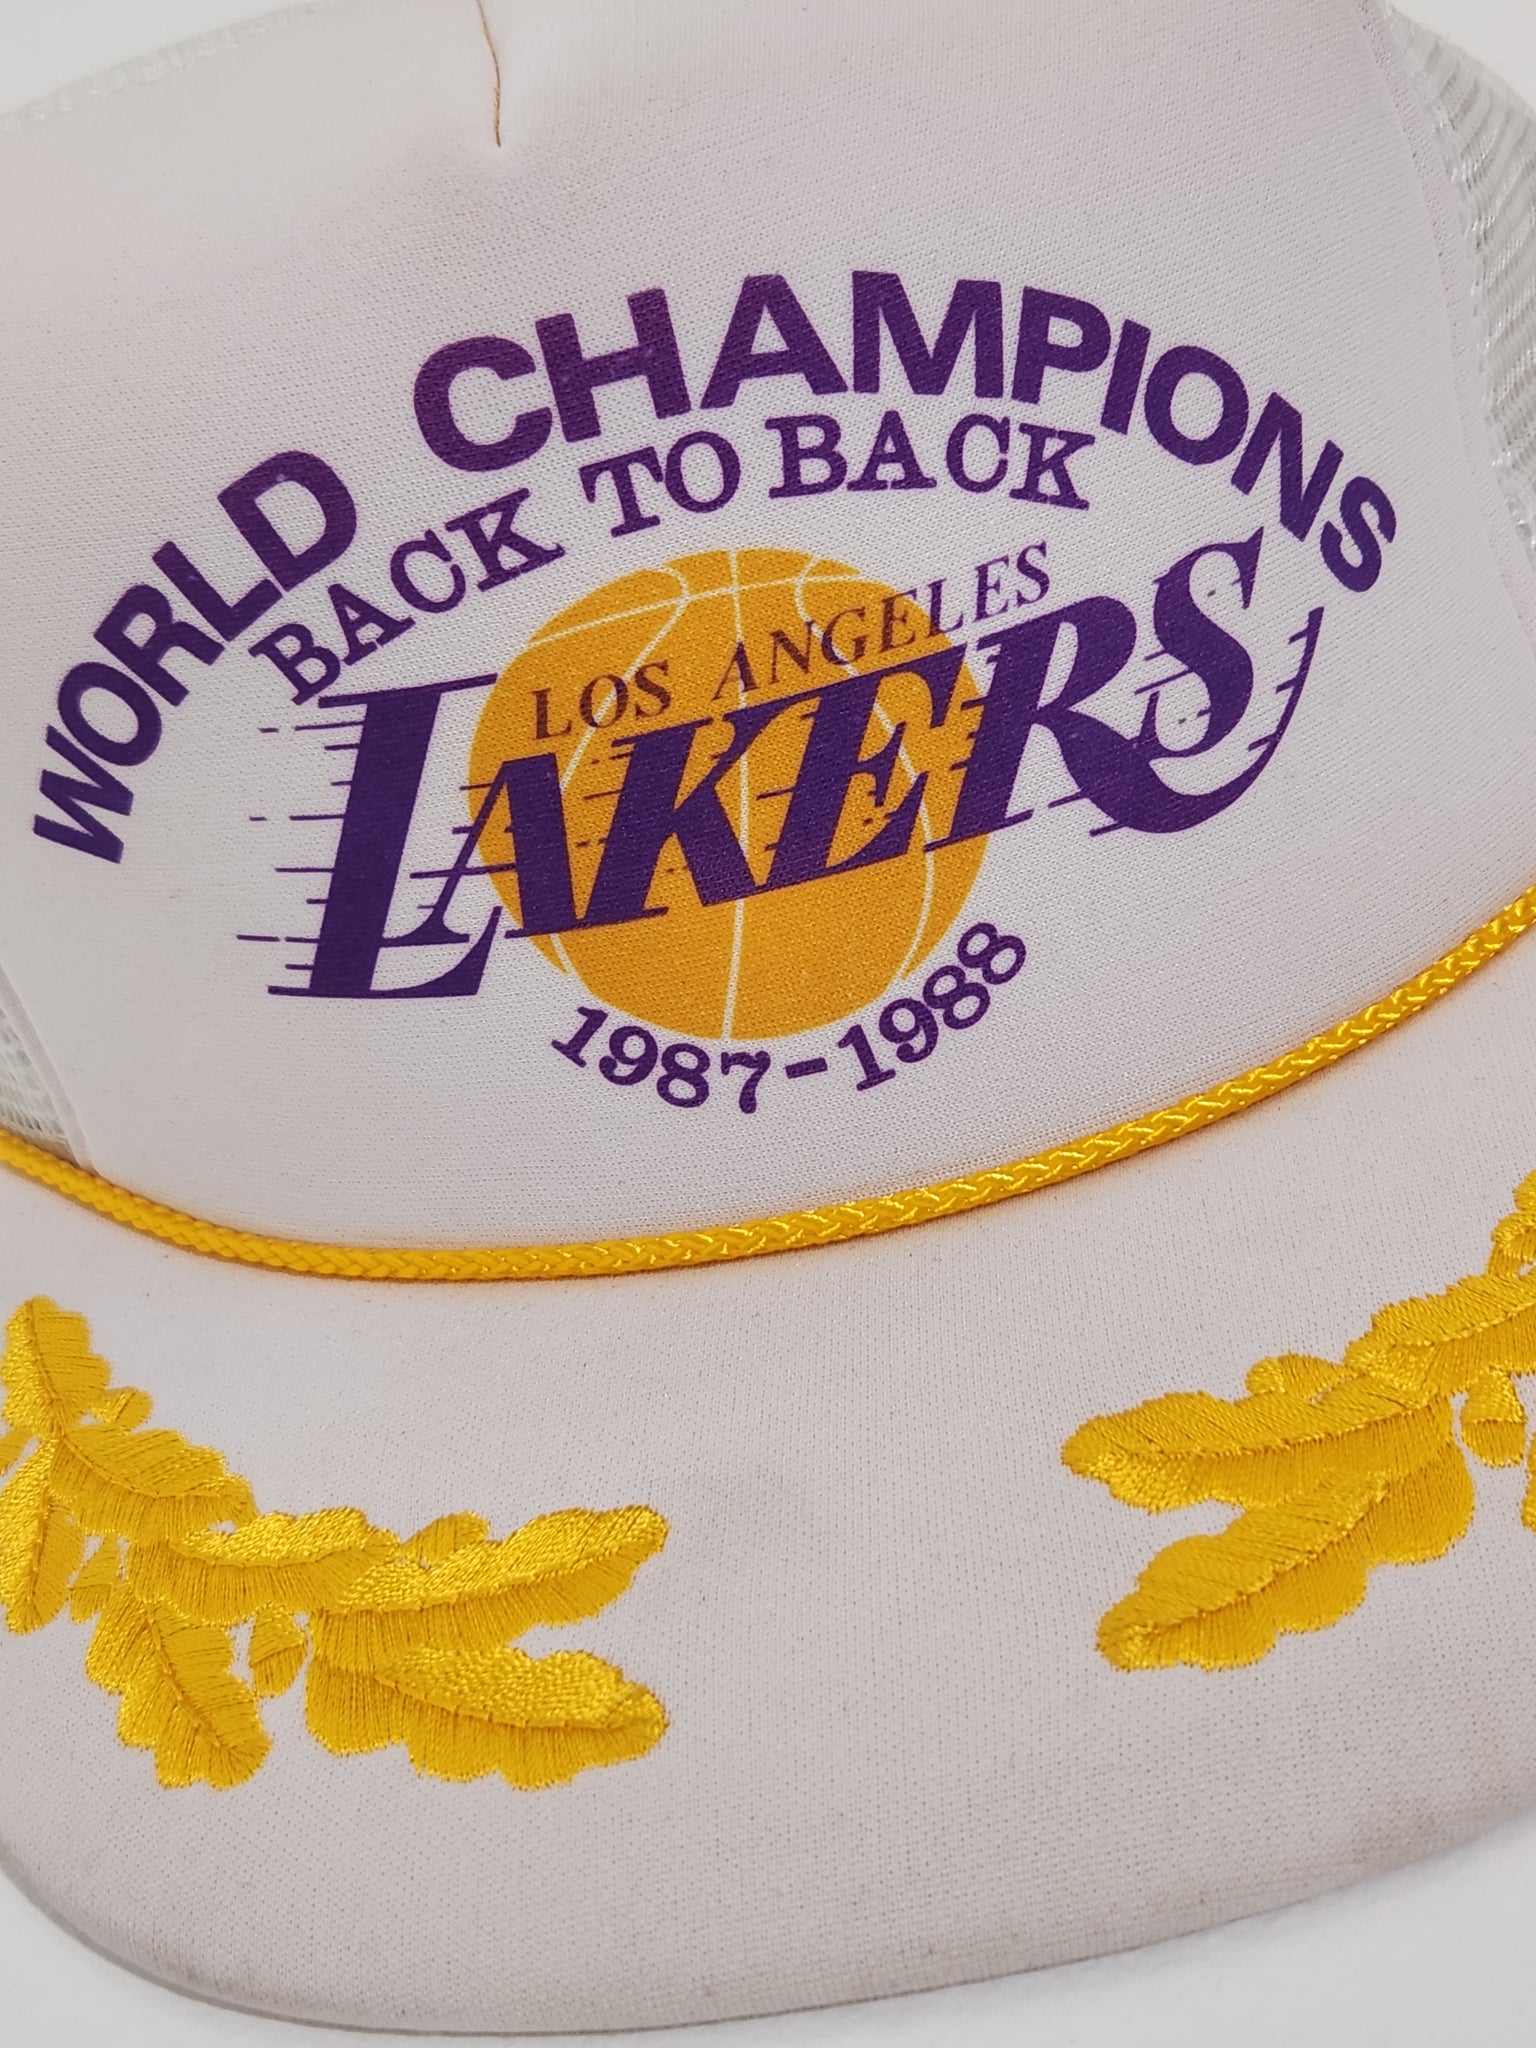 VINTAGE NBA LOS ANGELES LAKERS WORLD CHAMPS 1987 TEE SHIRT SIZE